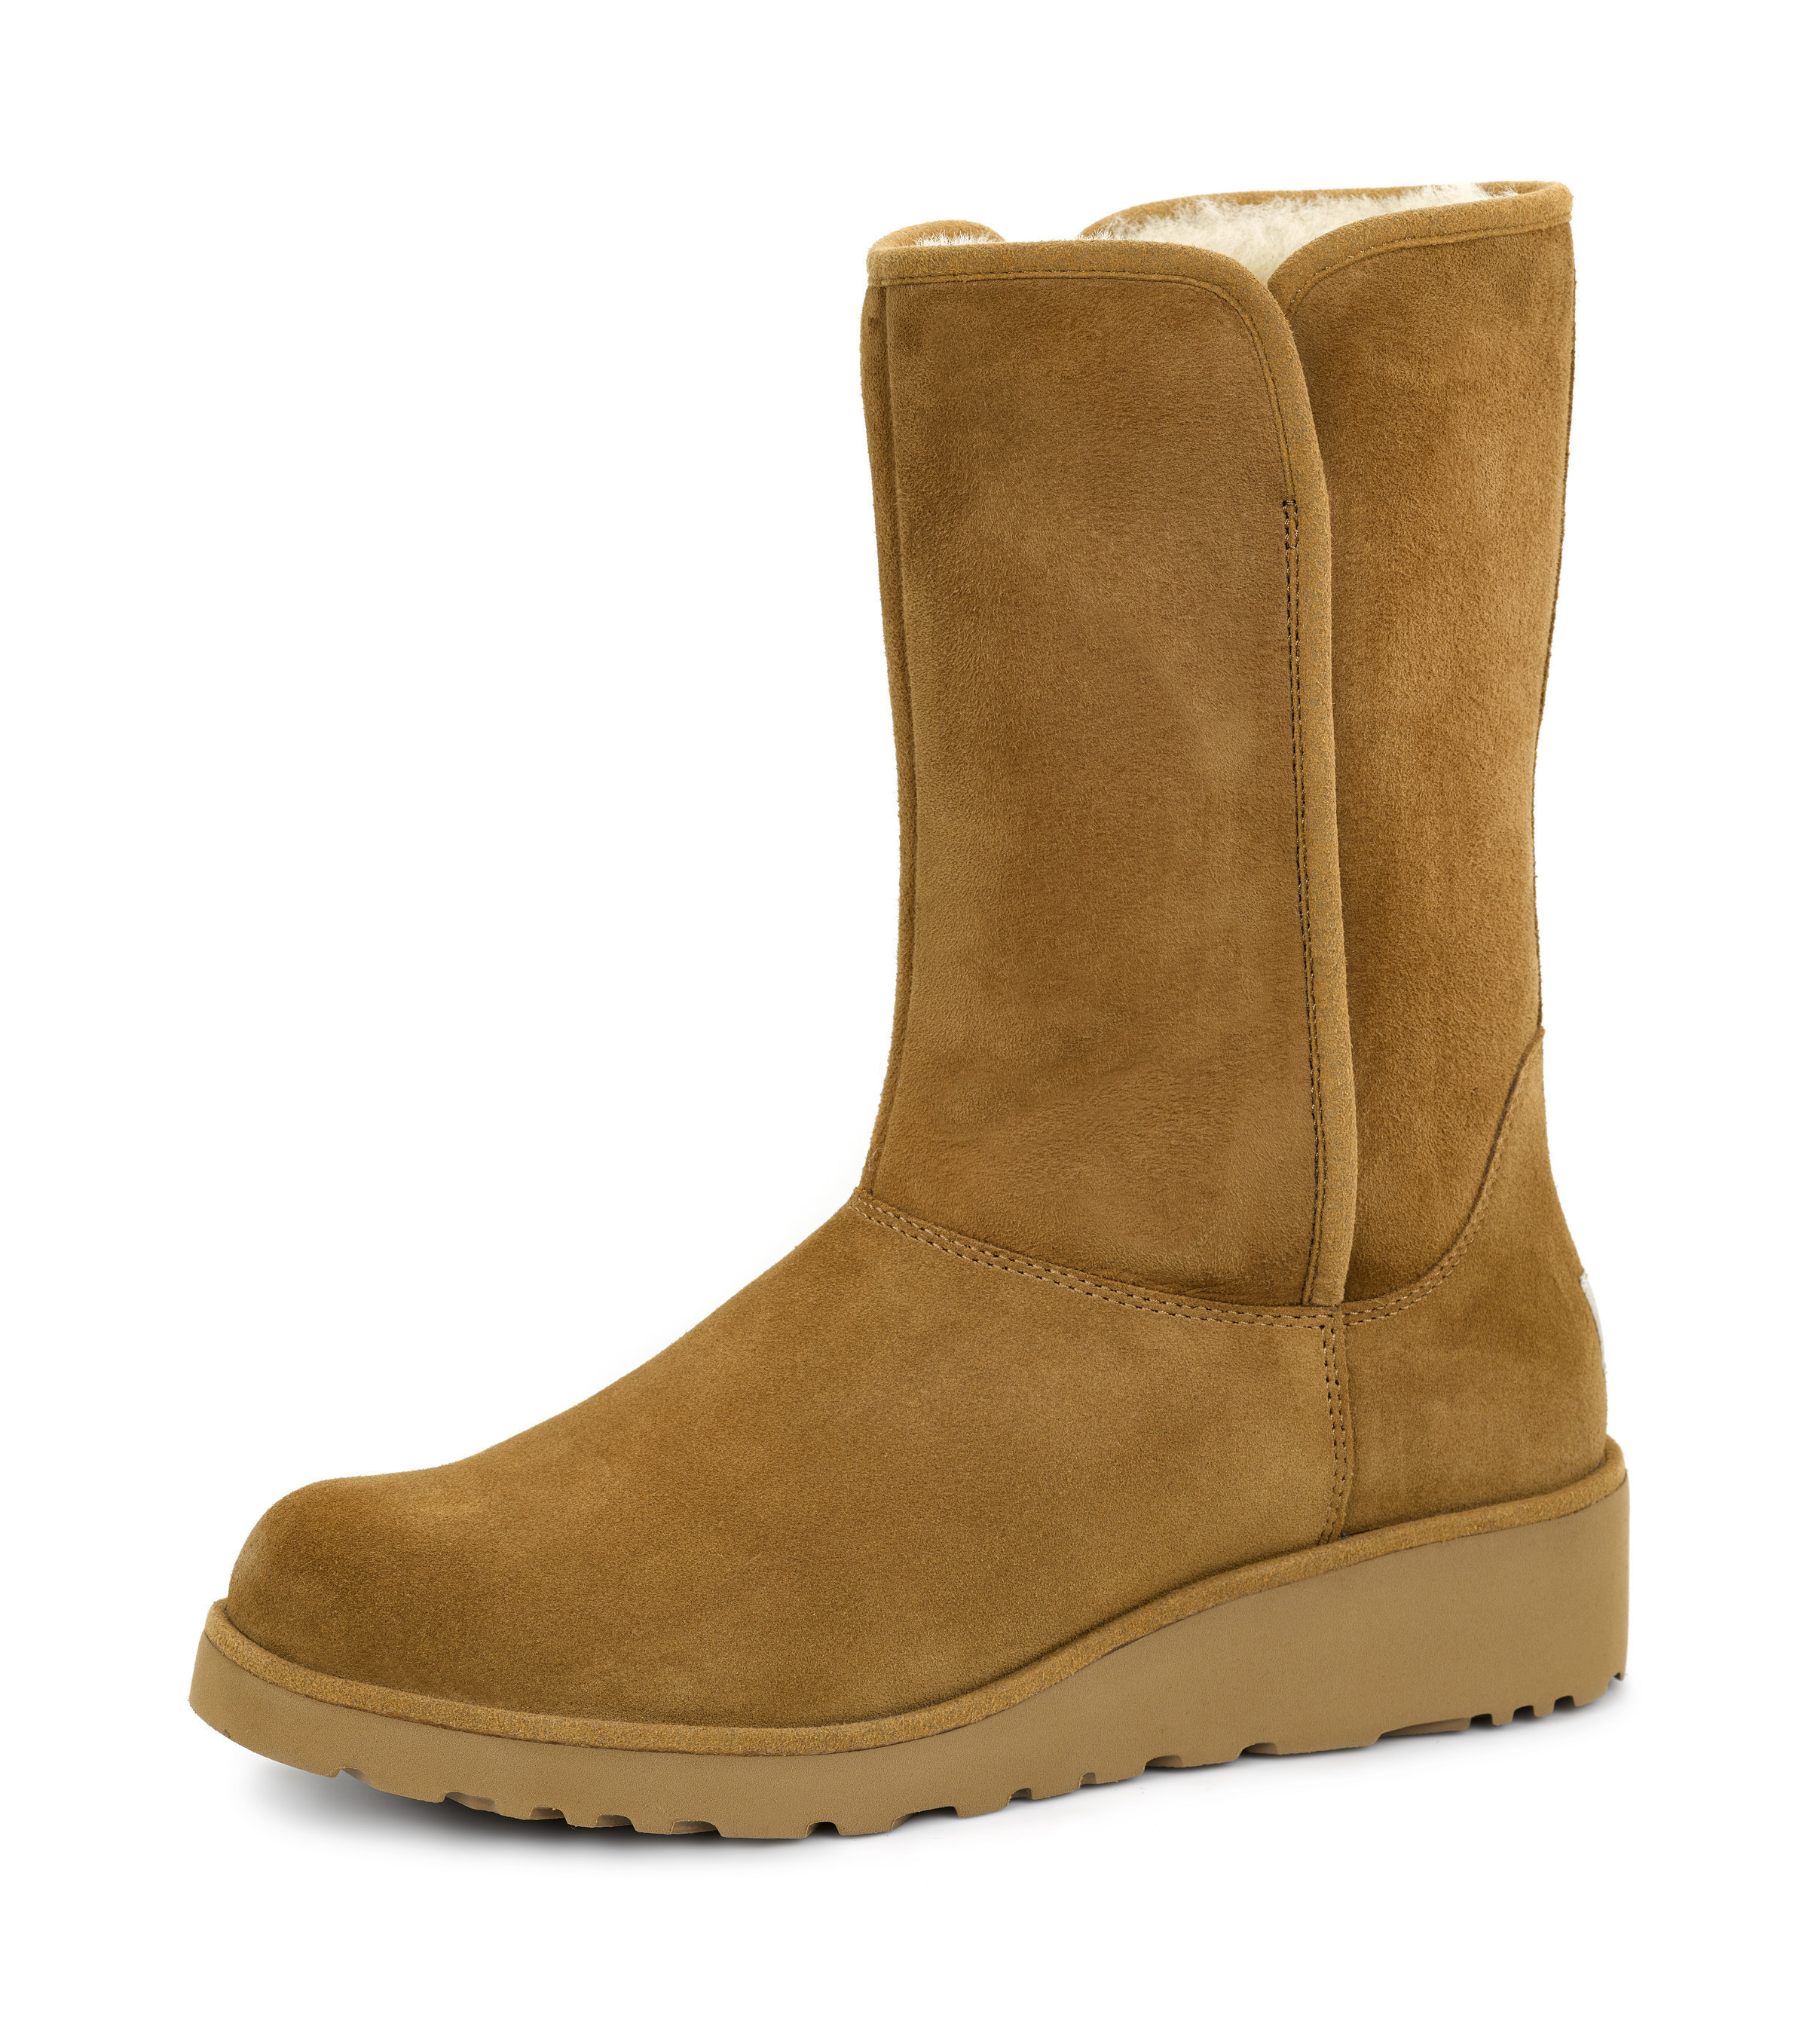 Introducing The UGG Classic Slim: The 